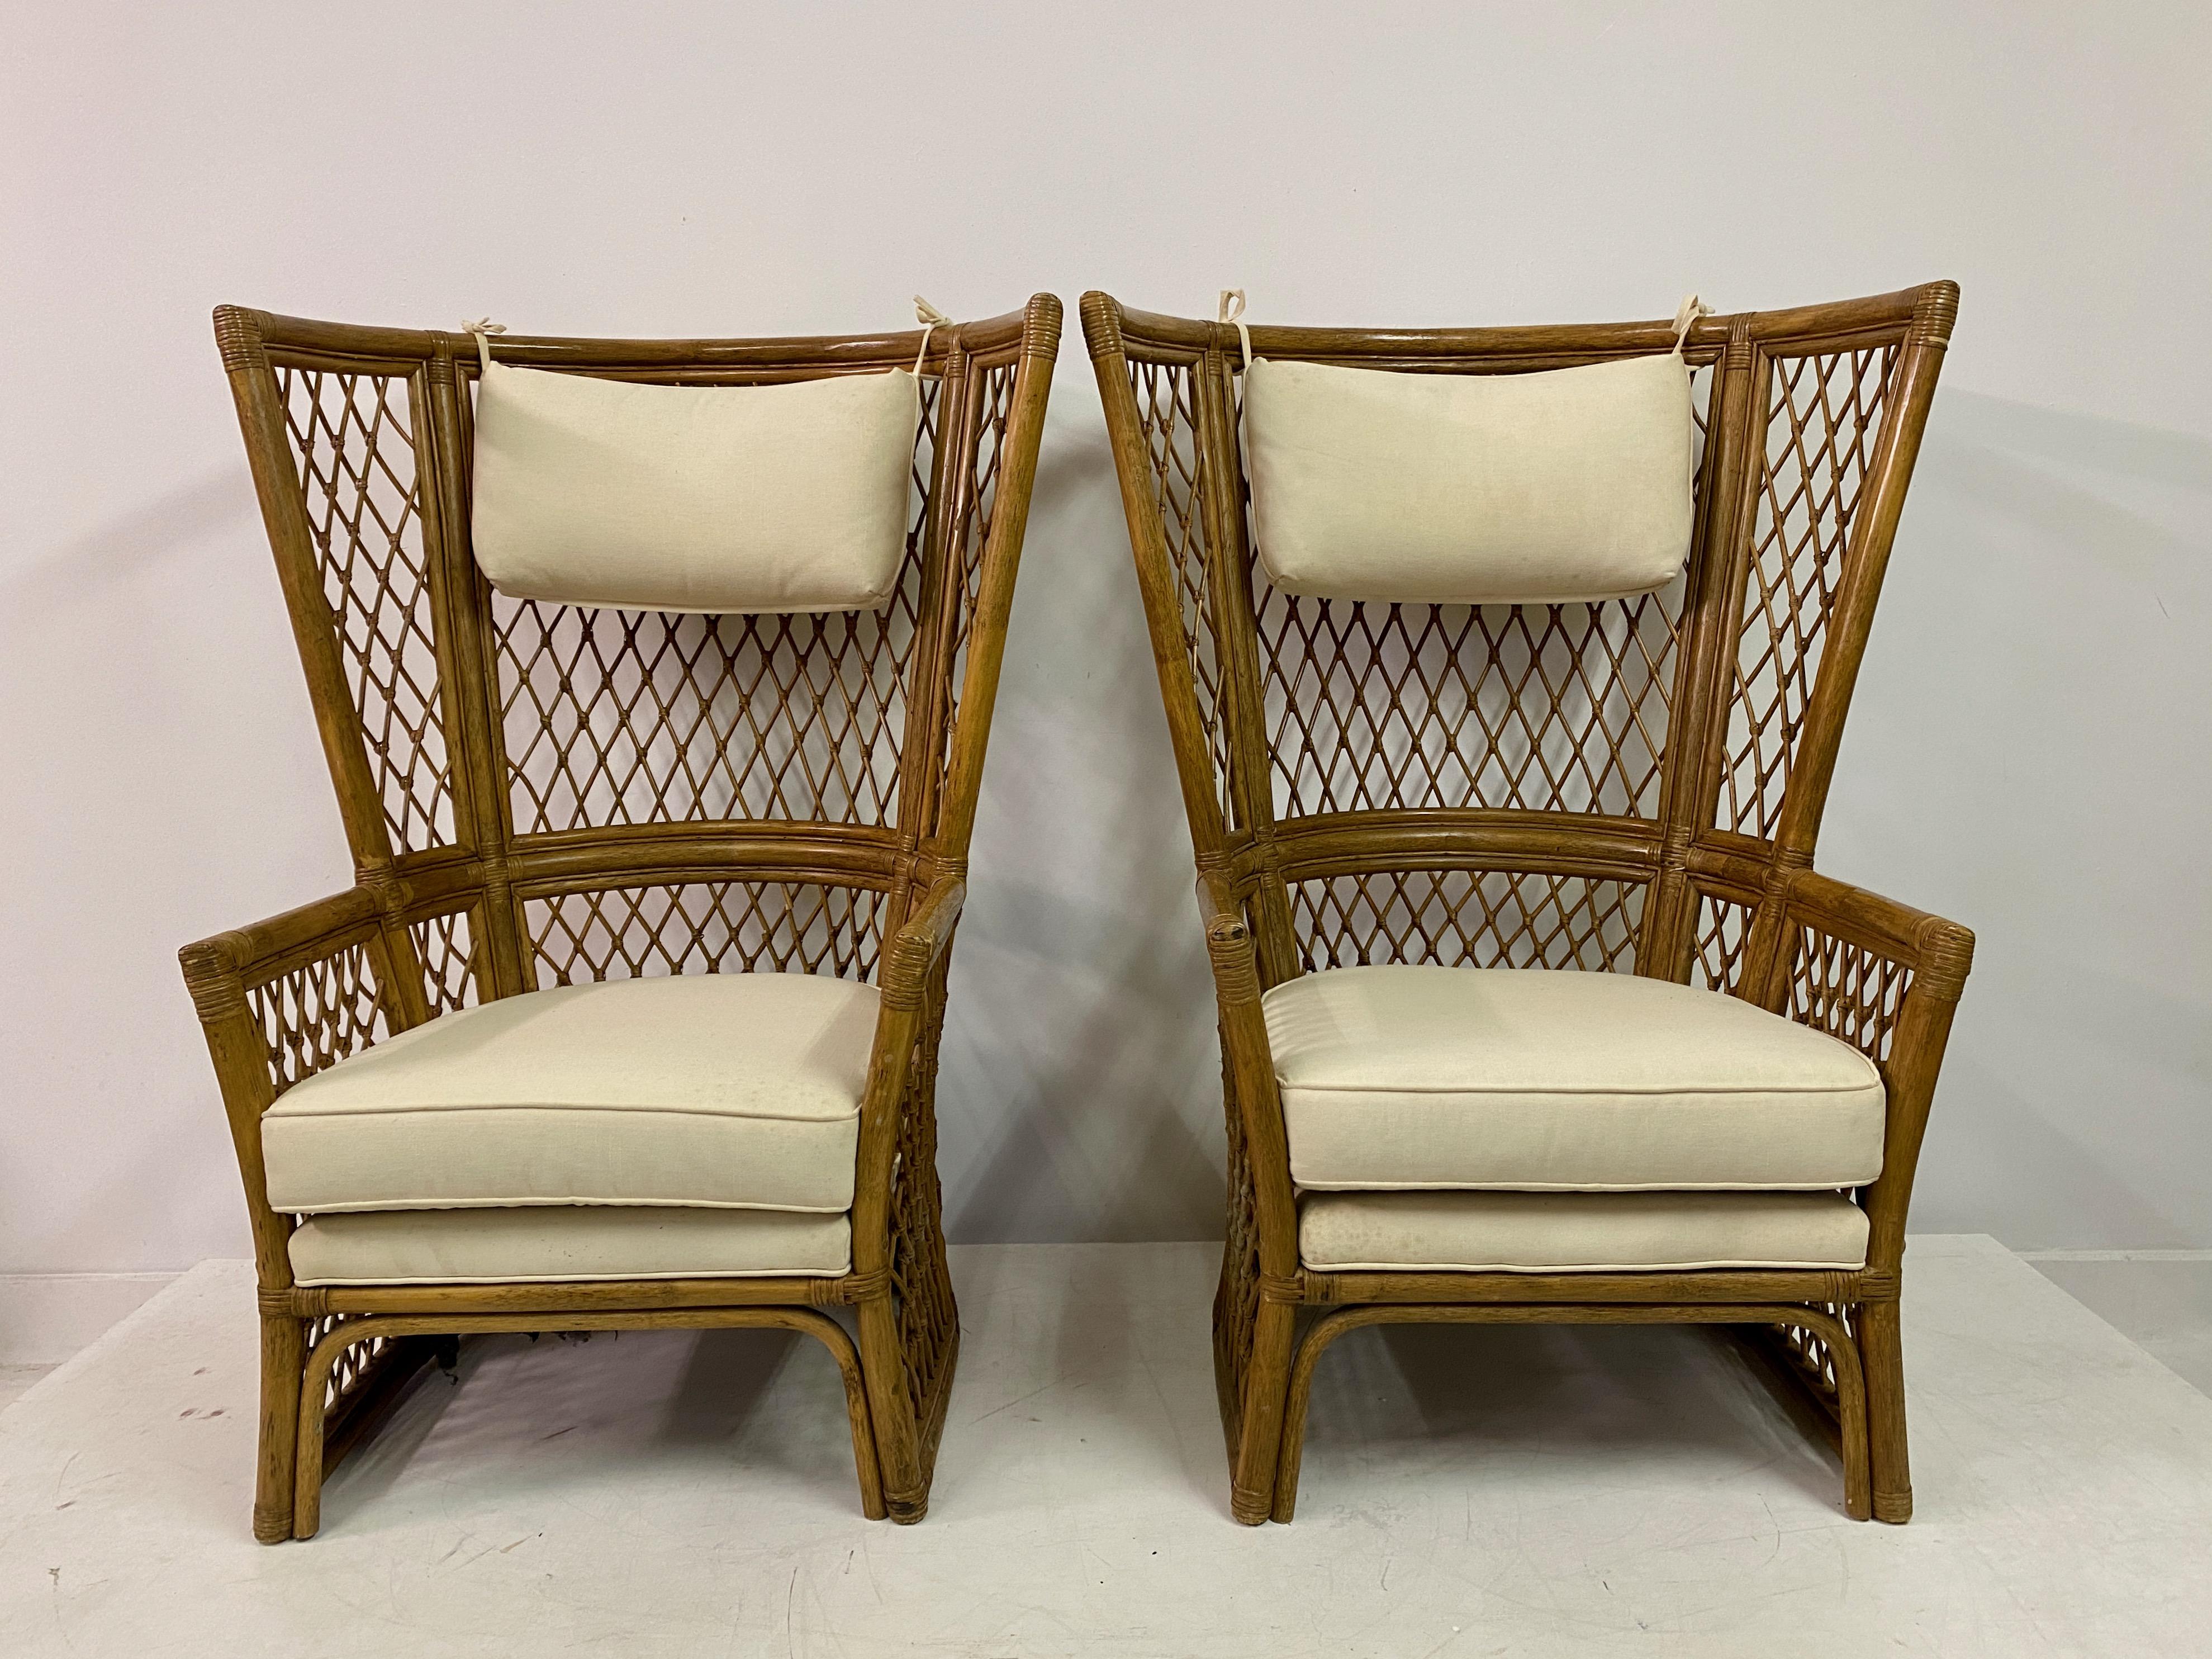 Pair Of 1980S High Back Bamboo Chairs With Ottomans In Good Condition For Sale In London, London